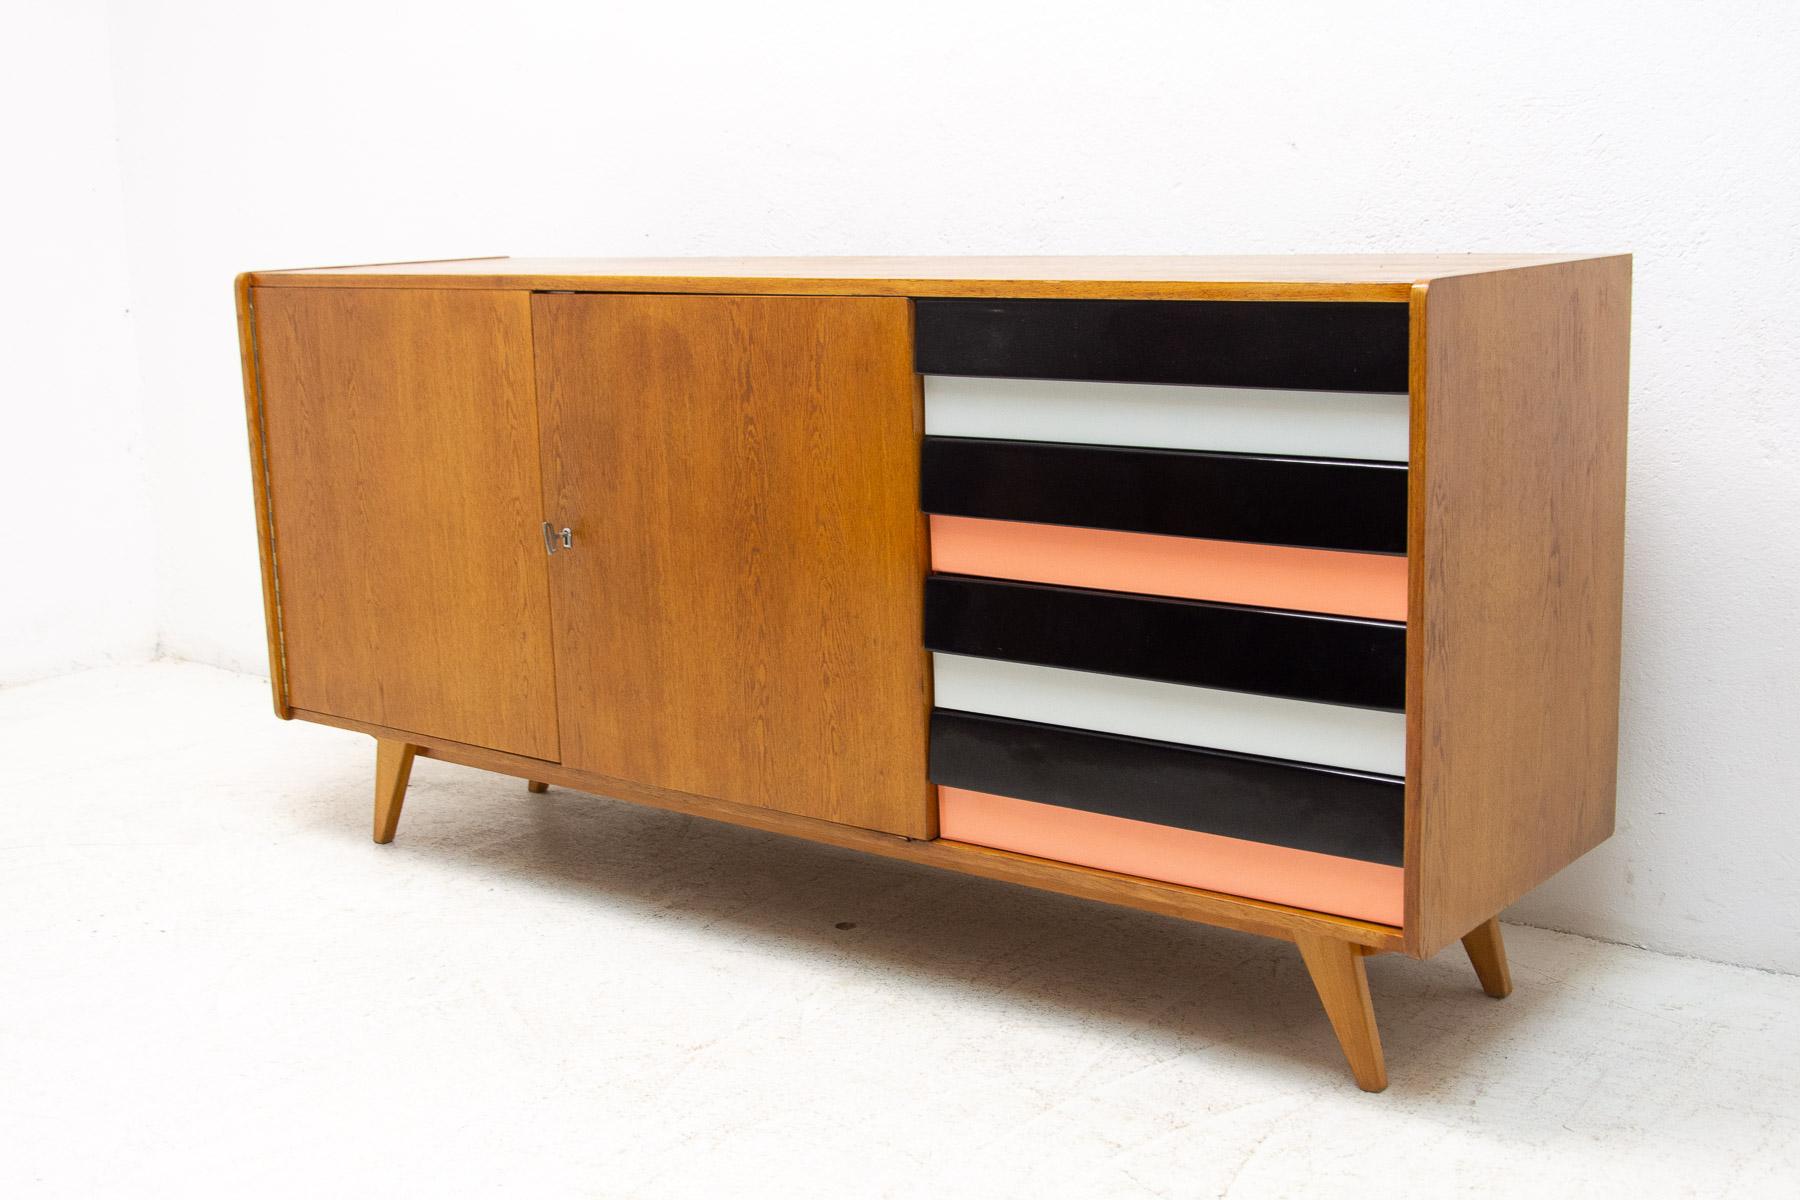 A popular vintage sideboard model U-460 from the 1960´s. It was designed by Jiri Jiroutek for Interier Praha. It features a beech wood, plywood, colored lacquered drawers. In very good condition.

Measures: Height: 76 cm, lenght: 165 cm, depth: 45